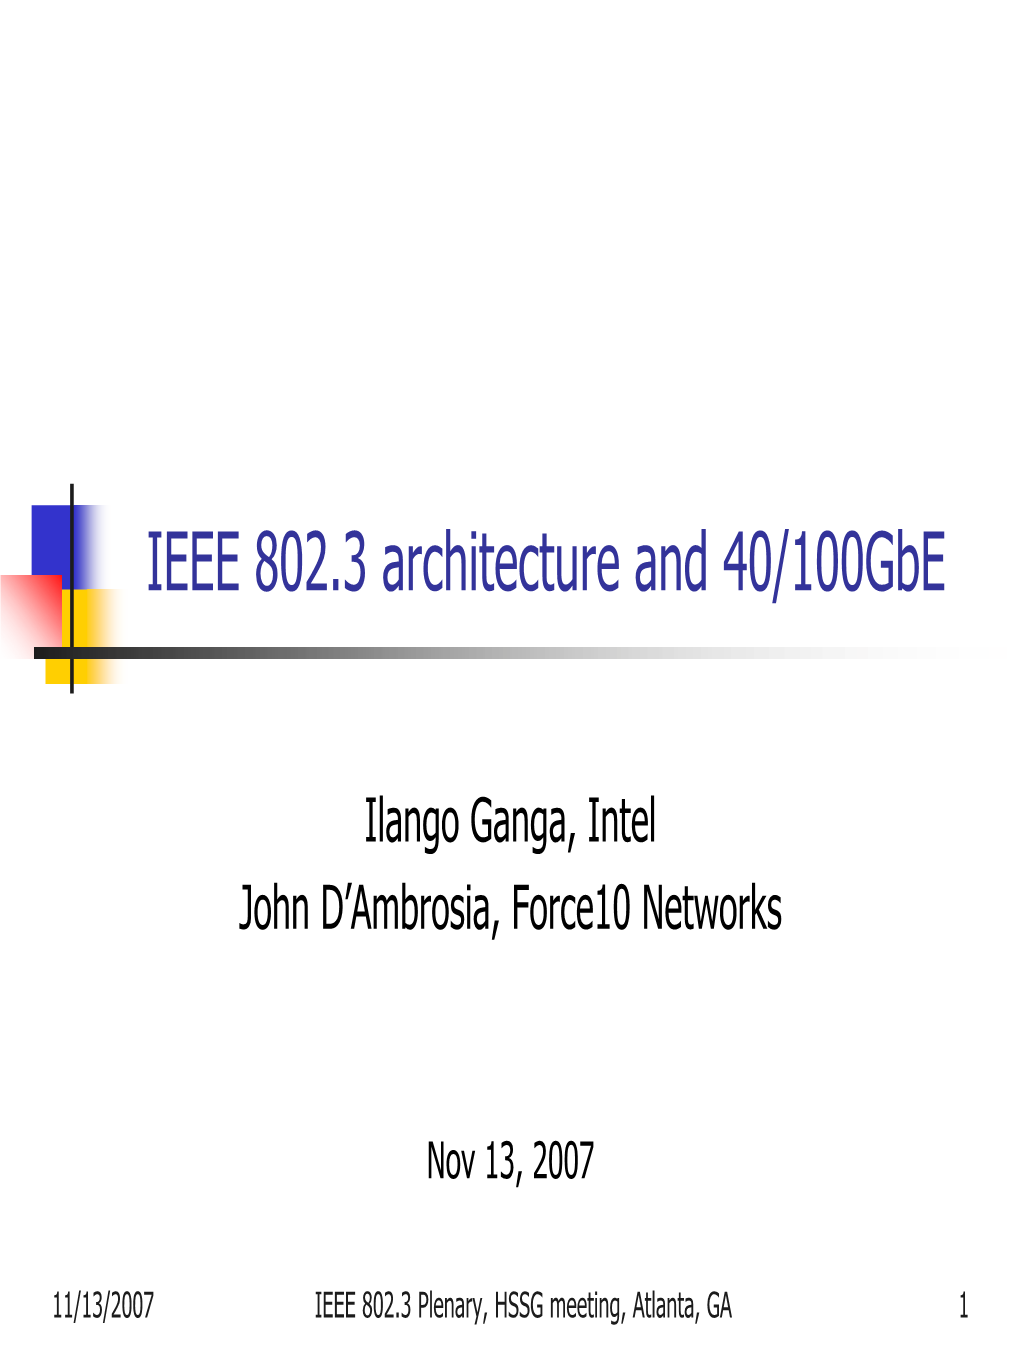 IEEE 802.3 Architecture and 40/100Gbe